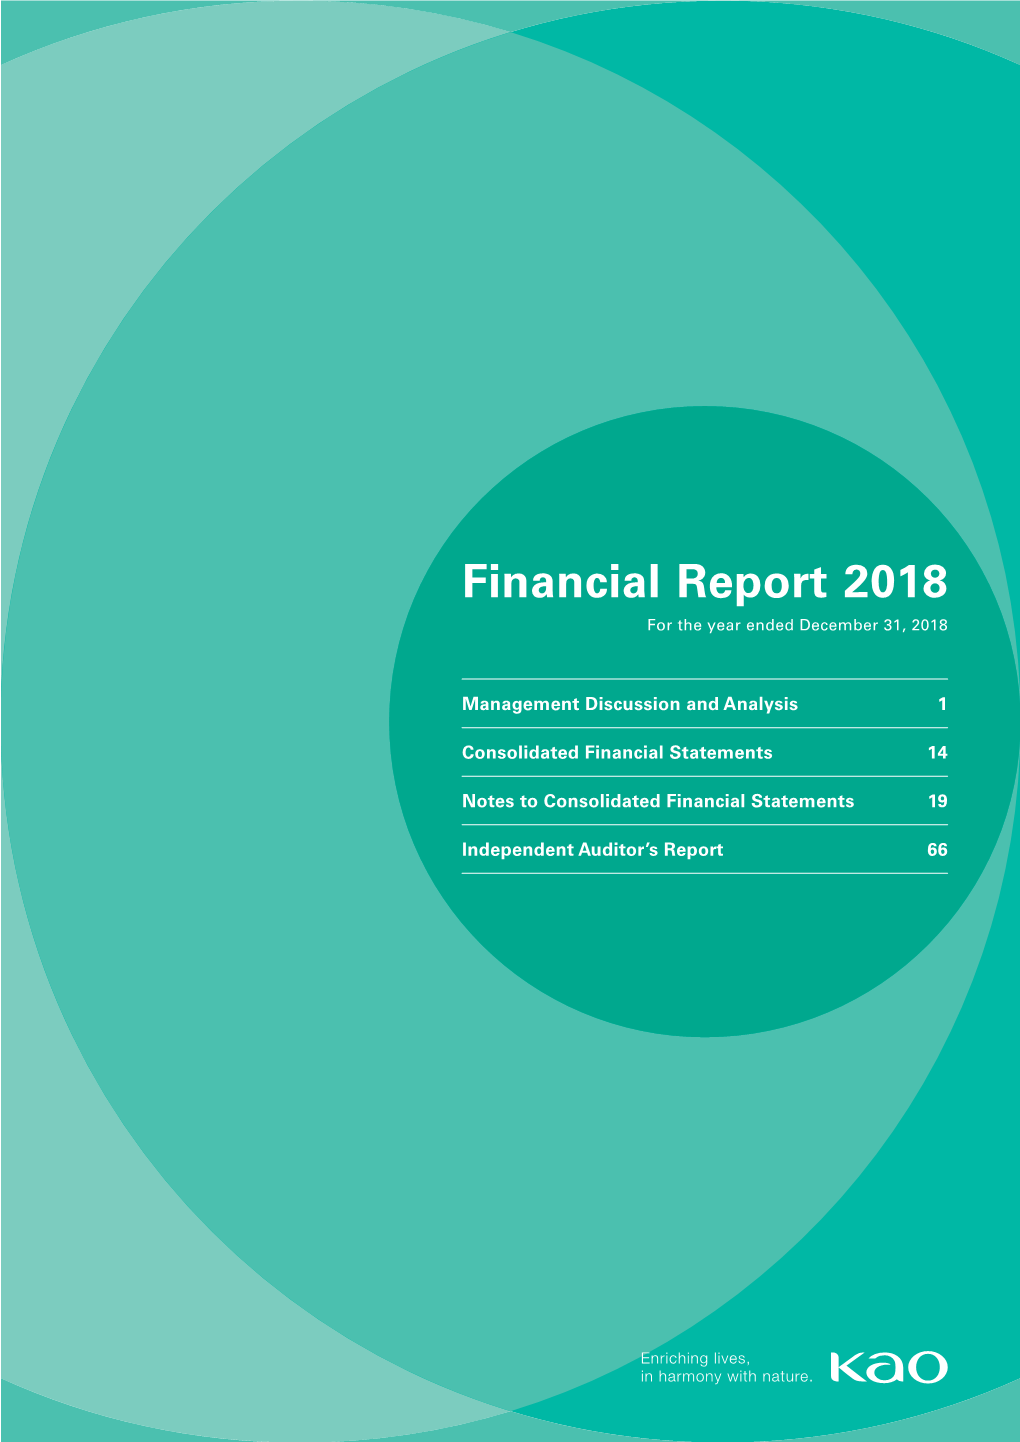 Financial Report 2018 for the Year Ended December 31, 2018